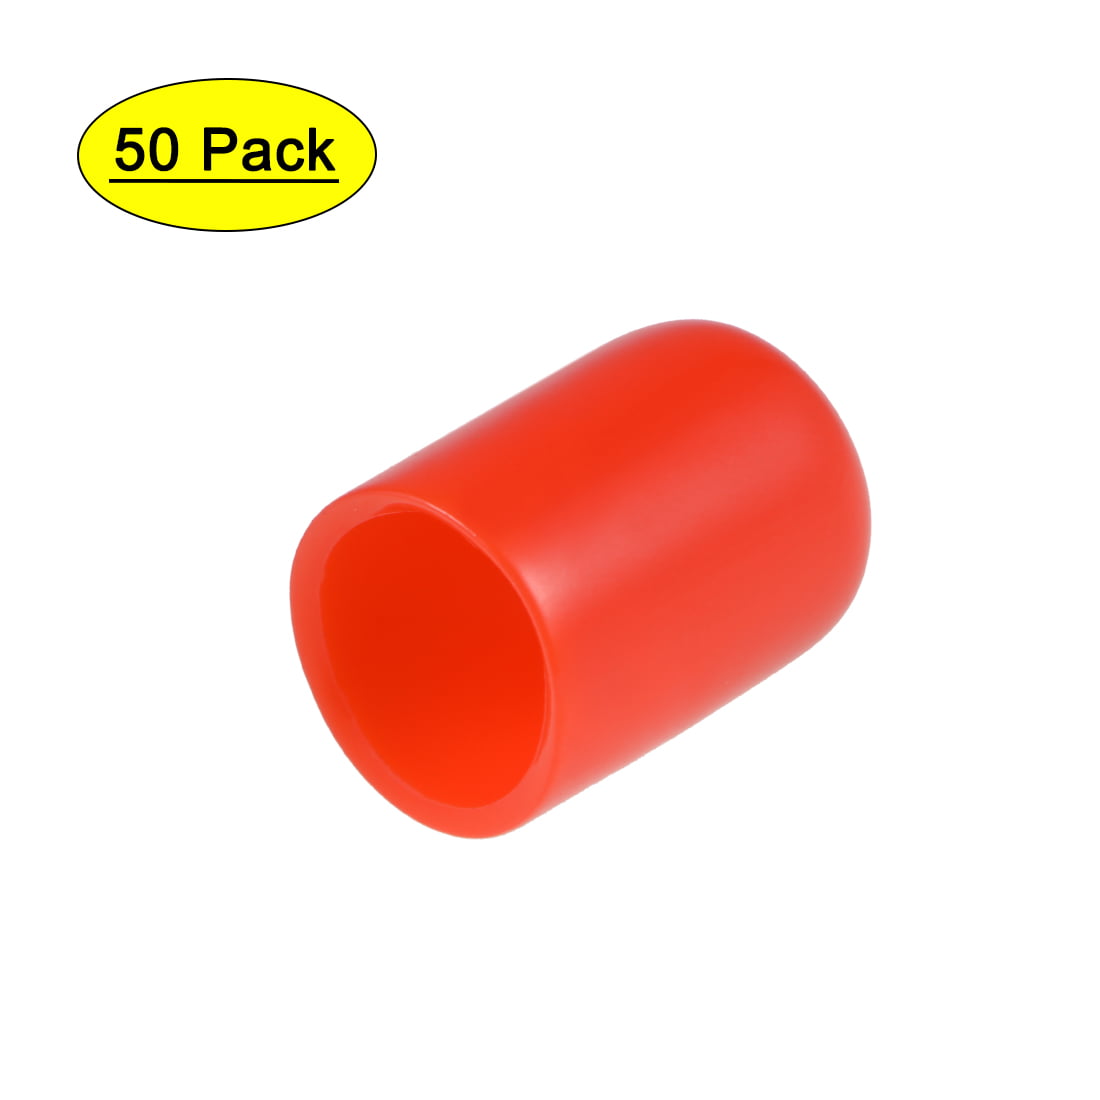 Screw Thread Protectors 7mm ID 15mm Length Round End Cap Cover Red 50pcs 